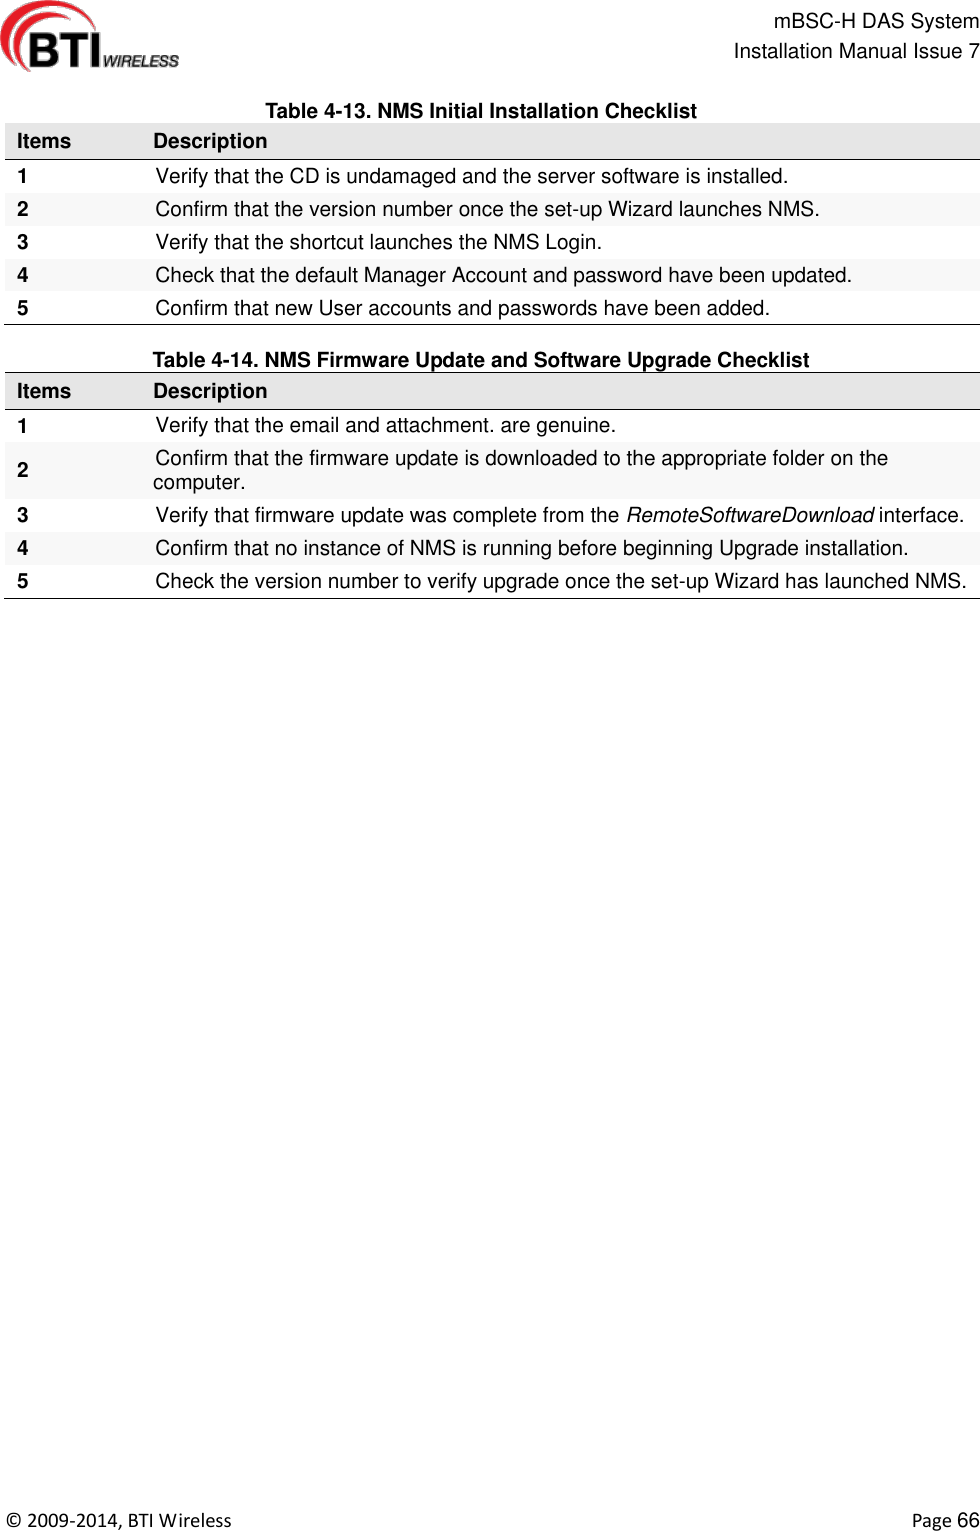                                                   mBSC-H DAS System   Installation Manual Issue 7  ©  2009-2014, BTI Wireless    Page 66  Table 4-13. NMS Initial Installation Checklist Items Description 1 Verify that the CD is undamaged and the server software is installed. 2 Confirm that the version number once the set-up Wizard launches NMS. 3 Verify that the shortcut launches the NMS Login. 4 Check that the default Manager Account and password have been updated. 5 Confirm that new User accounts and passwords have been added.  Table 4-14. NMS Firmware Update and Software Upgrade Checklist Items Description 1 Verify that the email and attachment. are genuine. 2 Confirm that the firmware update is downloaded to the appropriate folder on the computer. 3 Verify that firmware update was complete from the RemoteSoftwareDownload interface. 4 Confirm that no instance of NMS is running before beginning Upgrade installation. 5 Check the version number to verify upgrade once the set-up Wizard has launched NMS.  